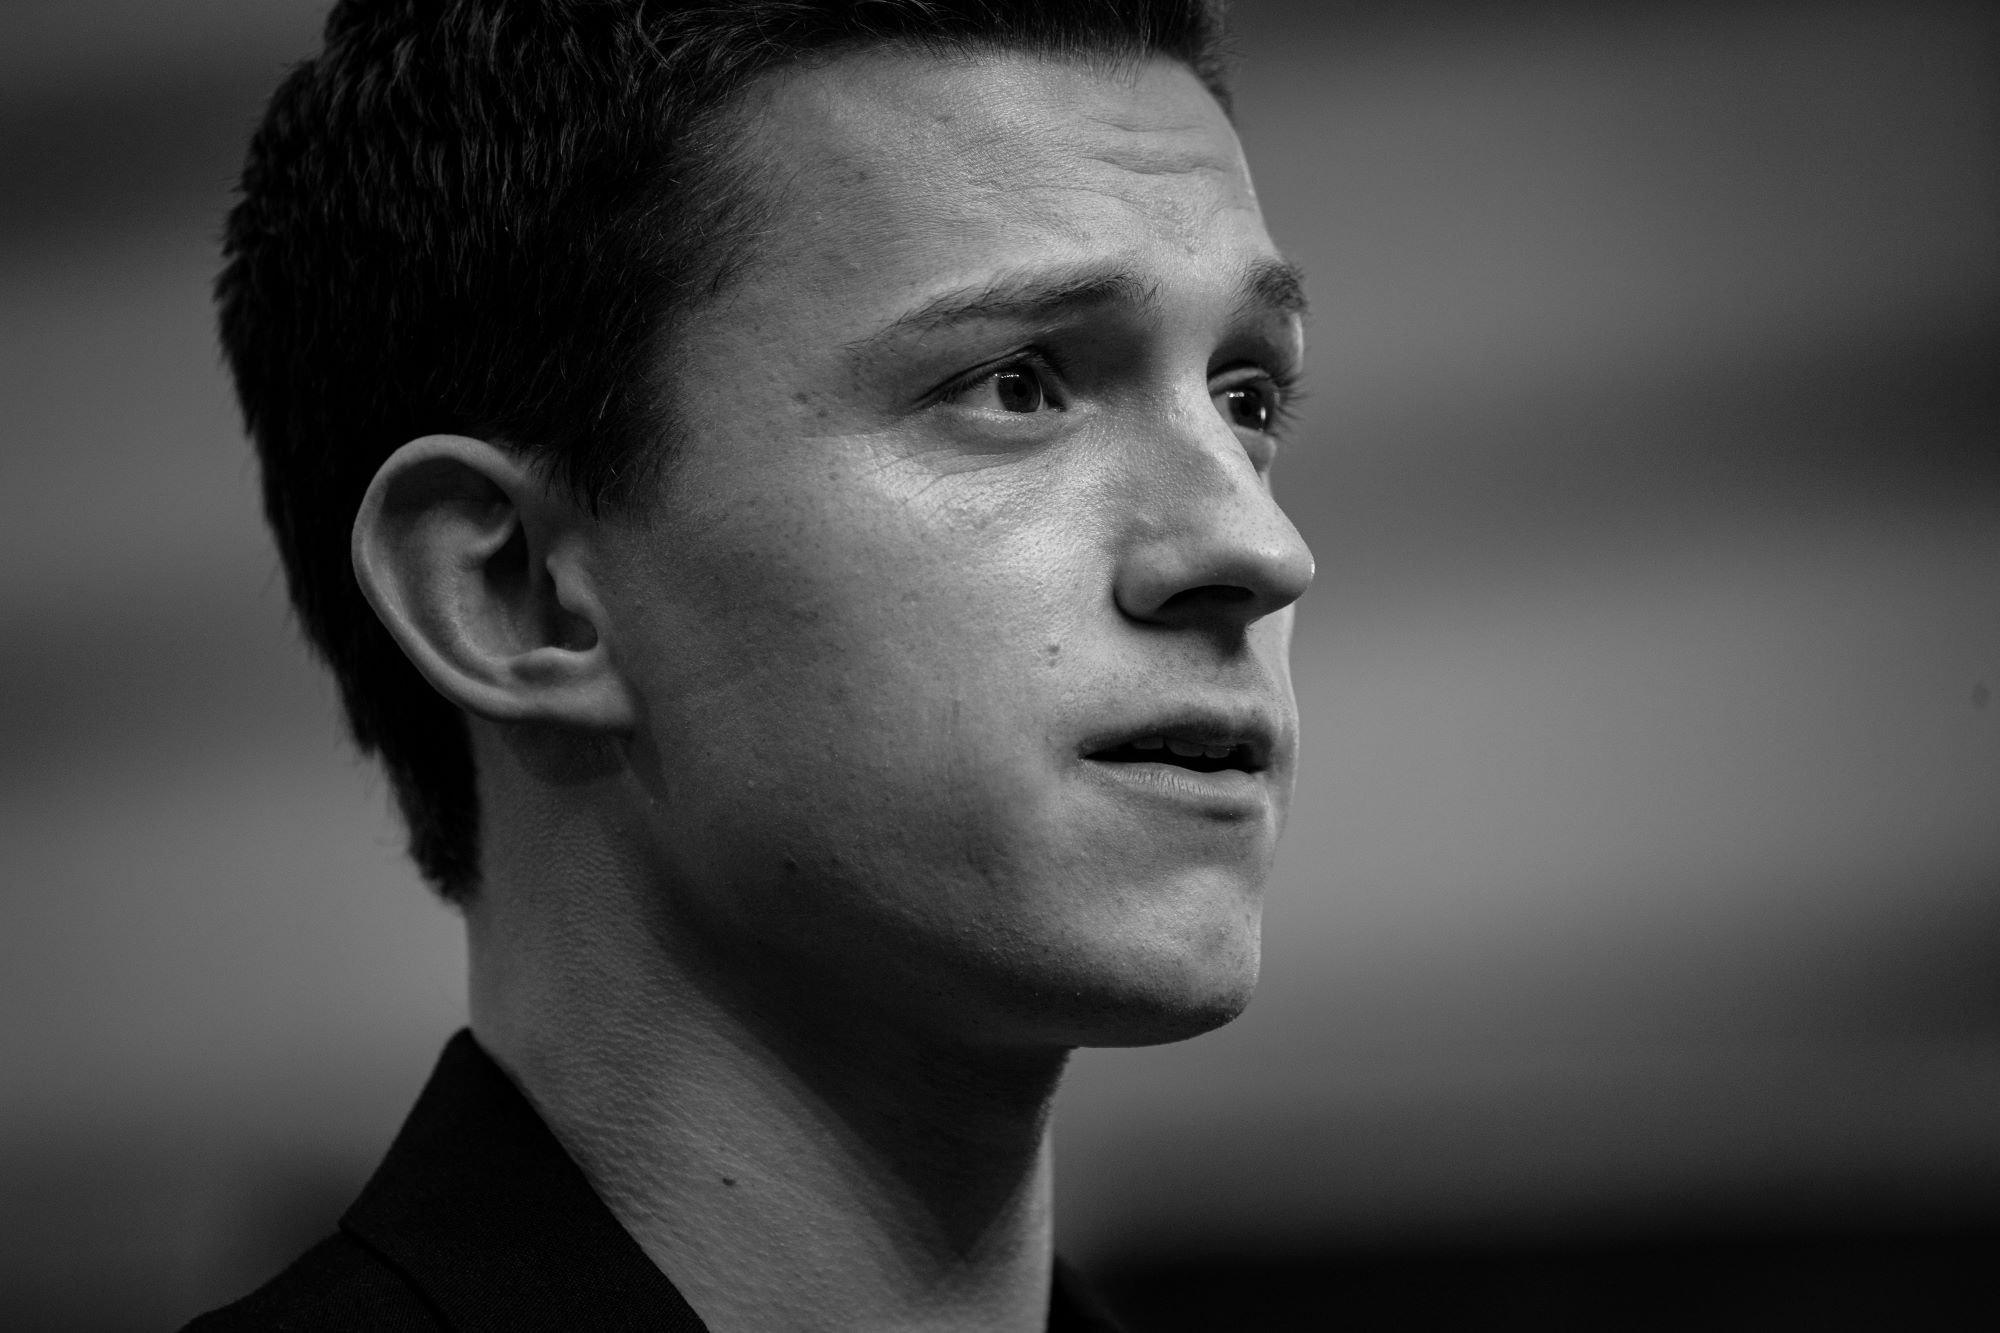 'Spider-Man: No Way Home' star Tom Holland wears a black suit. The photo has been converted to black and white.